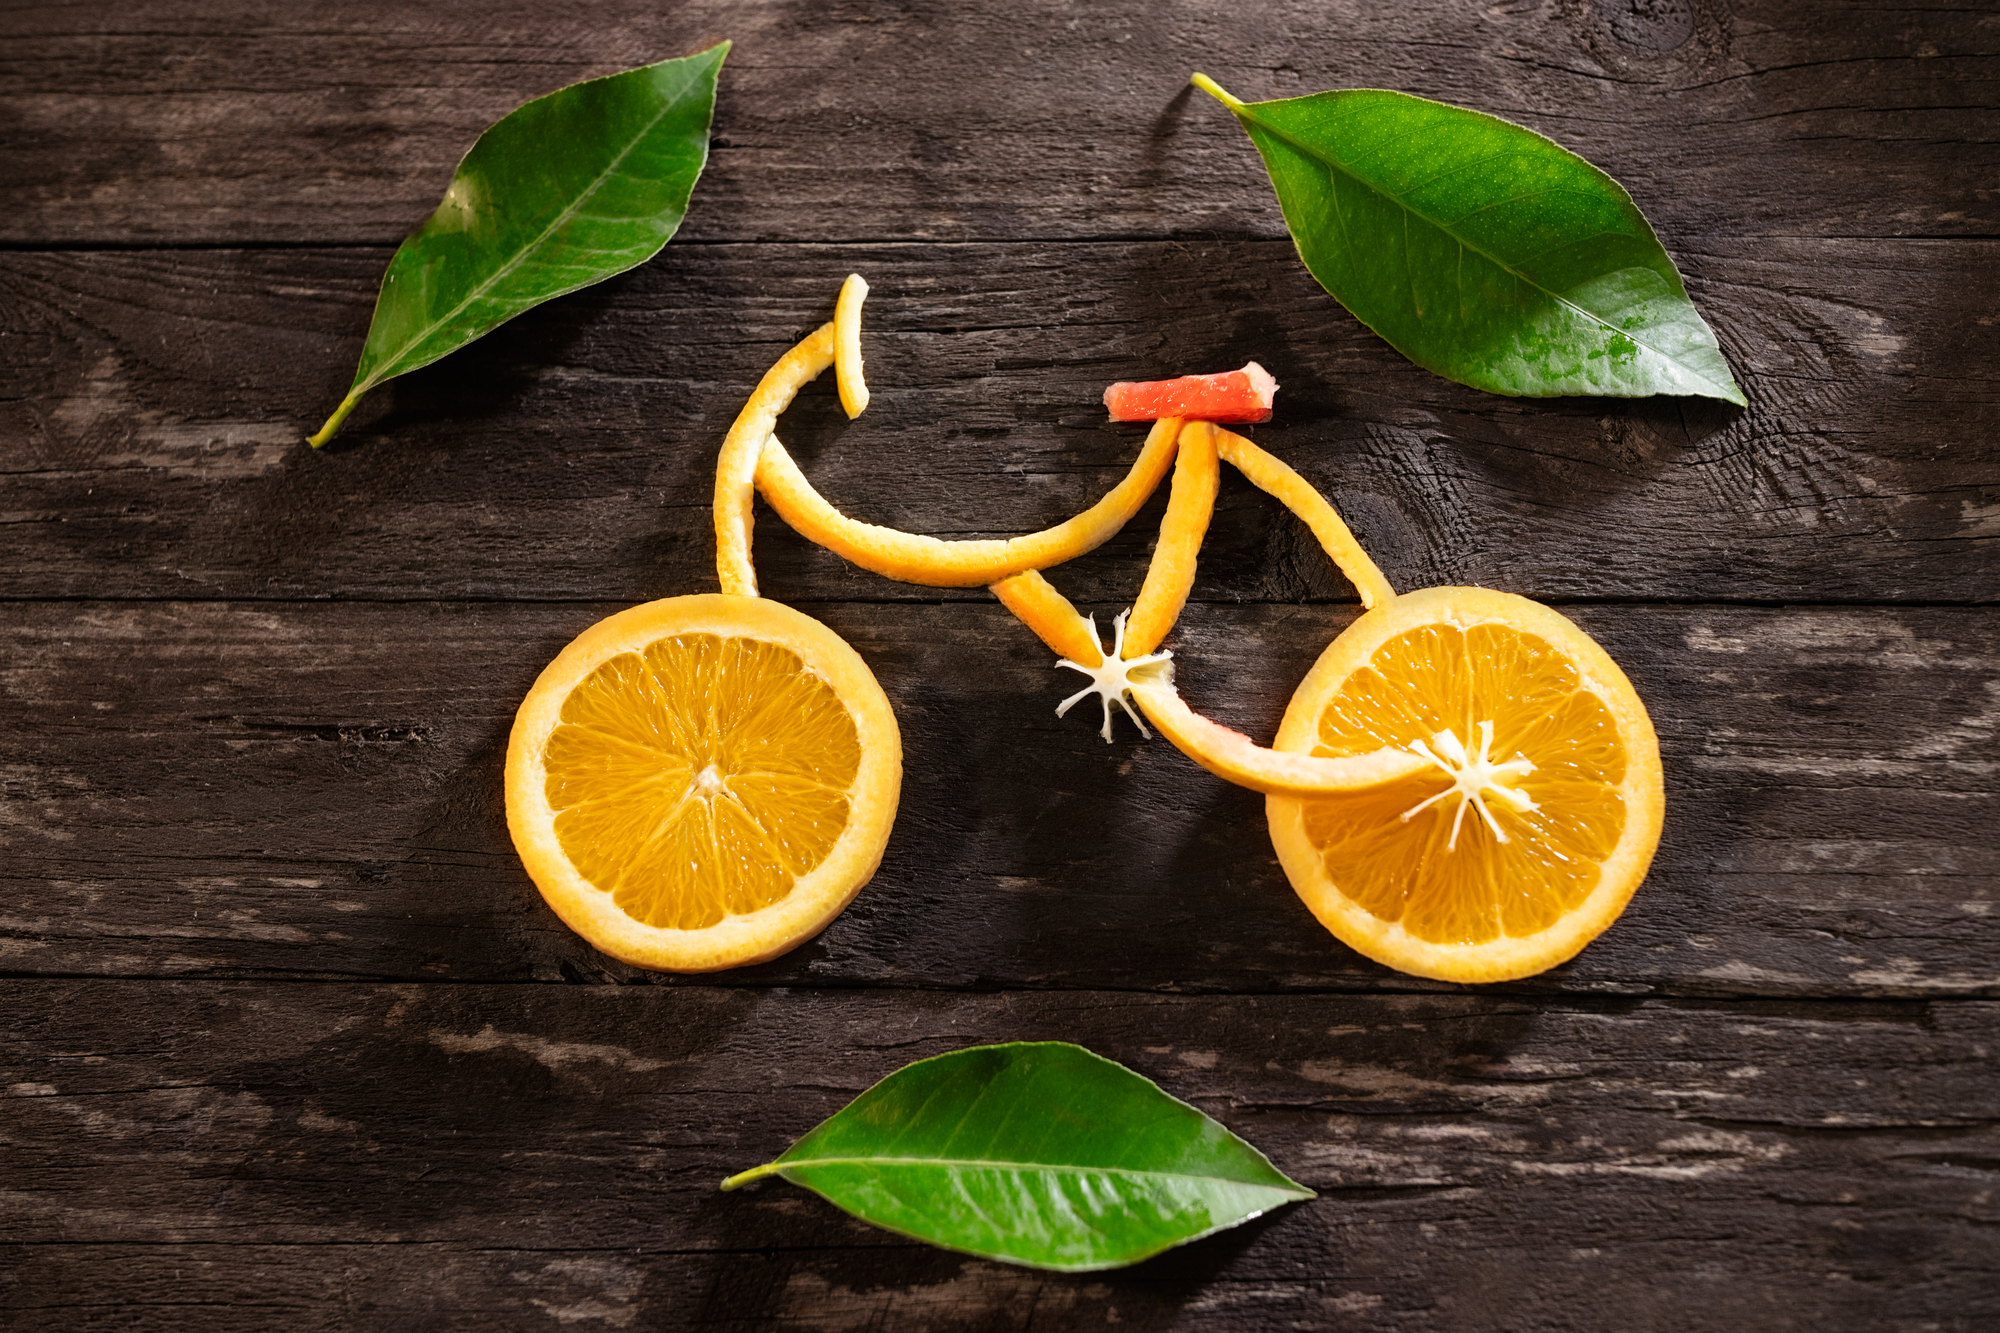 Healthy food concept of bicycle in detail made of fresh fruits